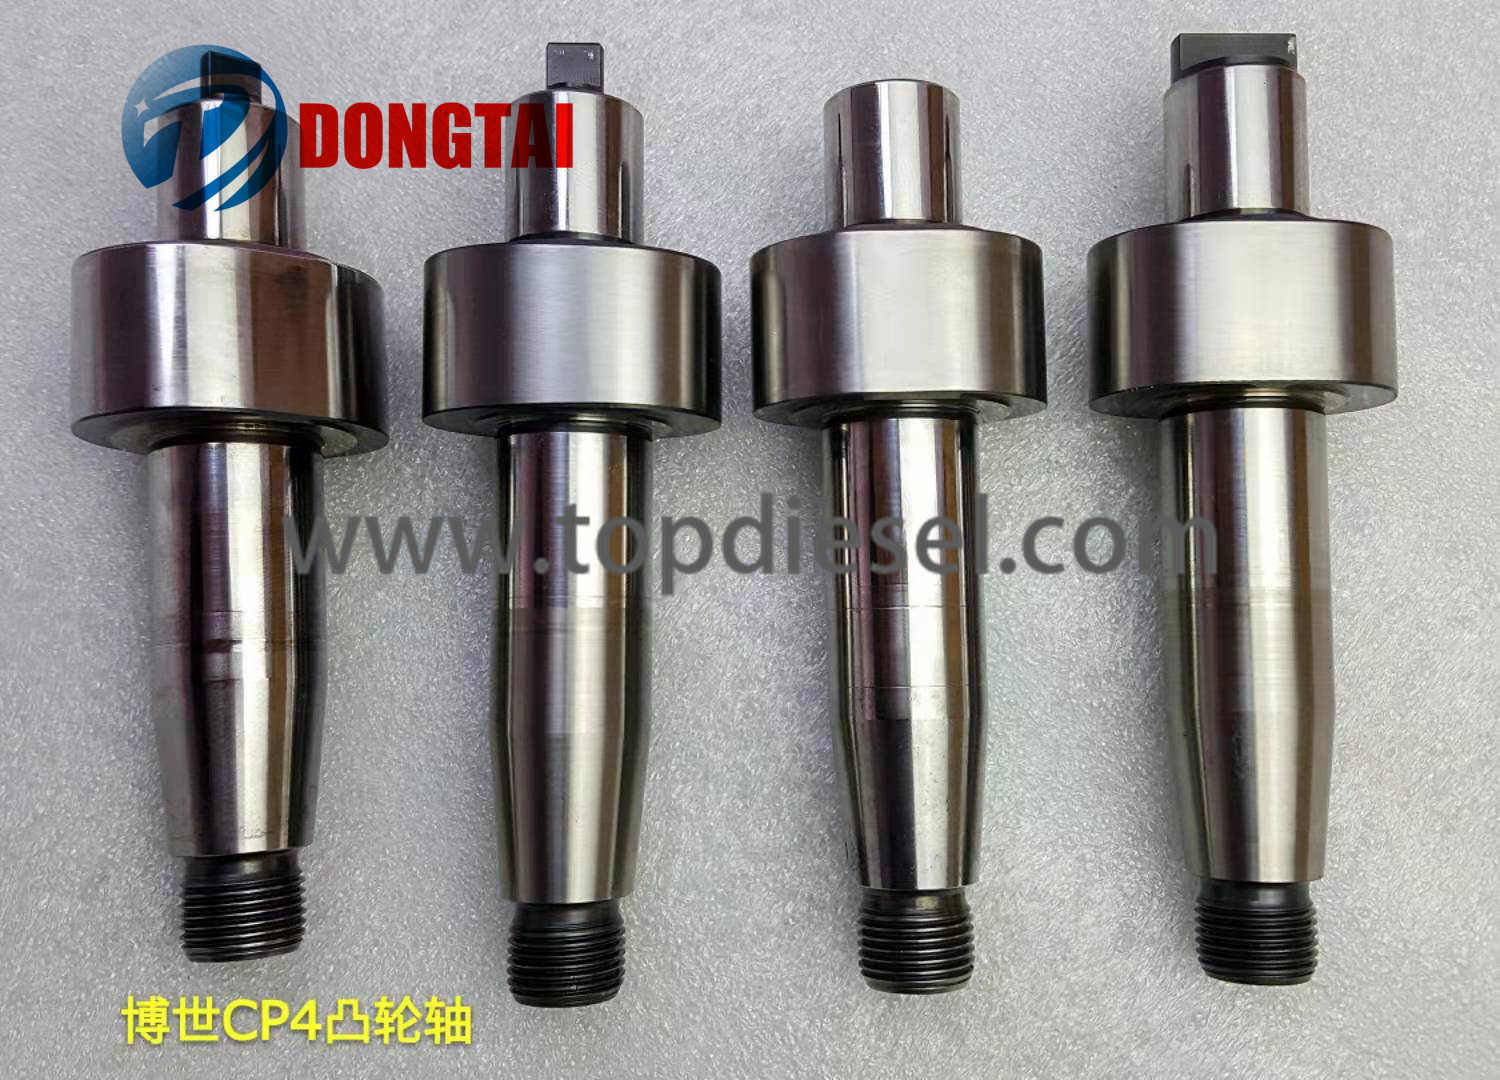 Super Lowest Price Control Valve - No,543(7)：CP4 Camshaft  – Dongtai